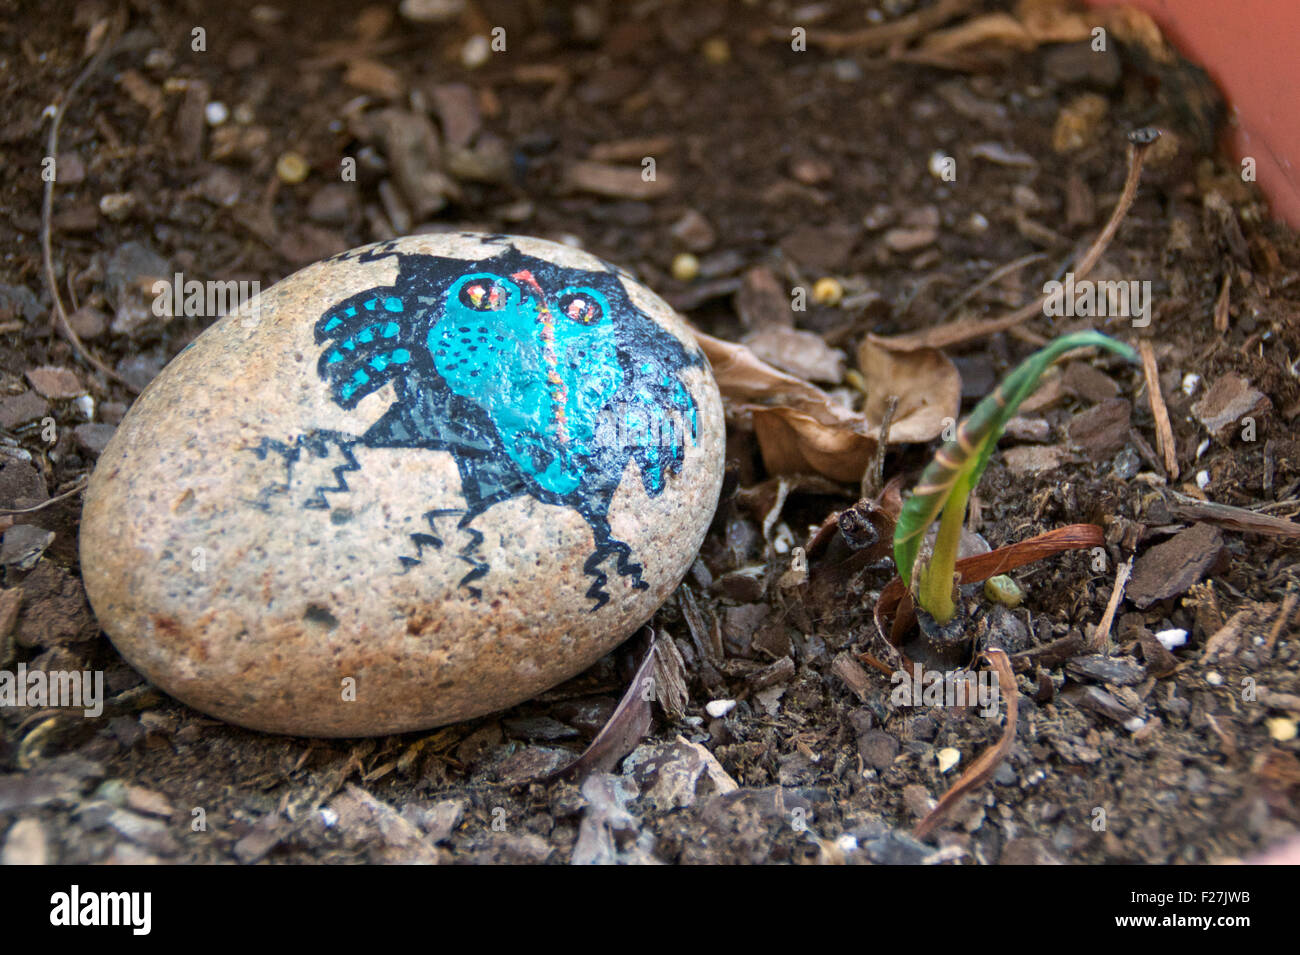 A painted stone in a flower pot. Stock Photo